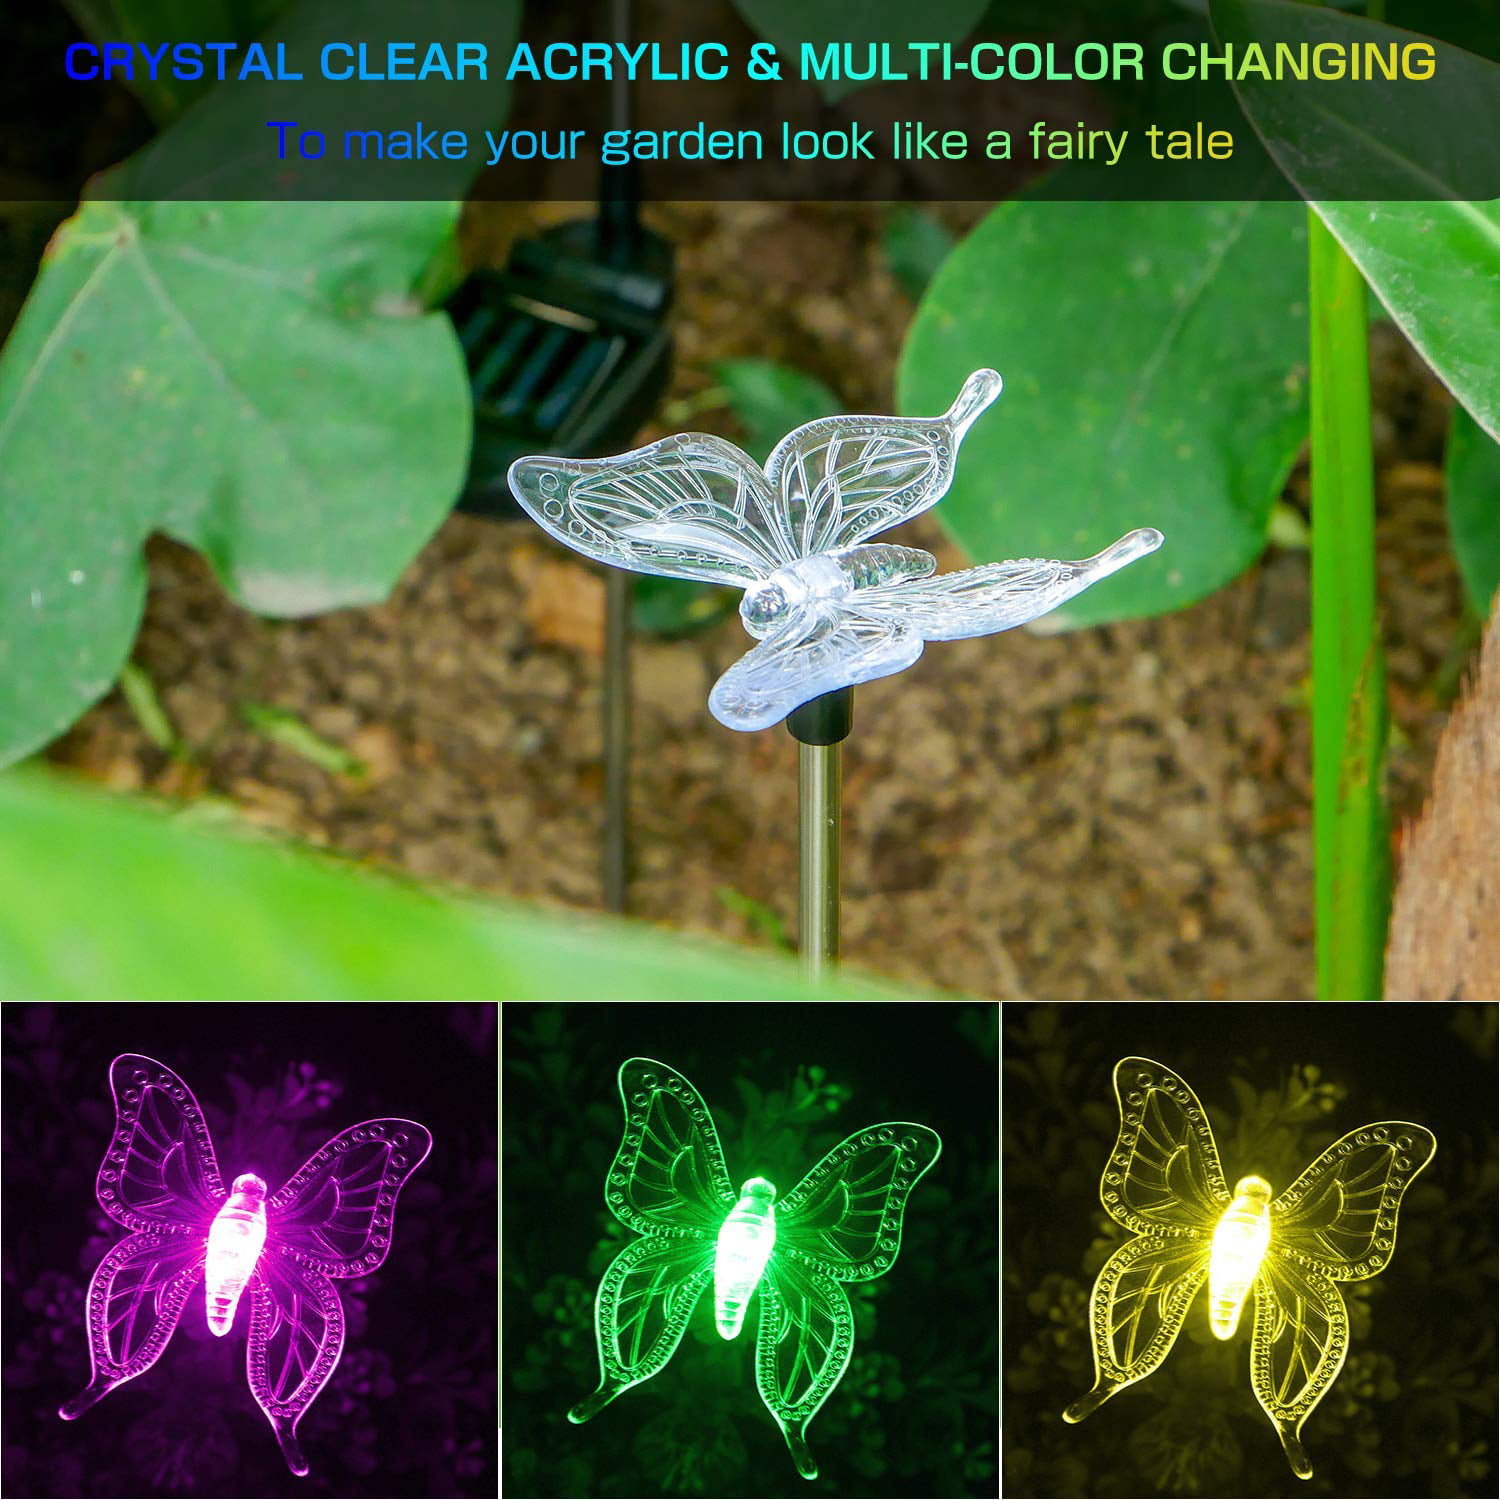 Color Changing Decorative Landscape Light LED Solar Powered Hummingbird Butterfly Dragonfly for Patio Yard Pathway Halloween Christmas 6-pack OxyLED Figurine Stake Light Solar Garden Lights Outdoor 